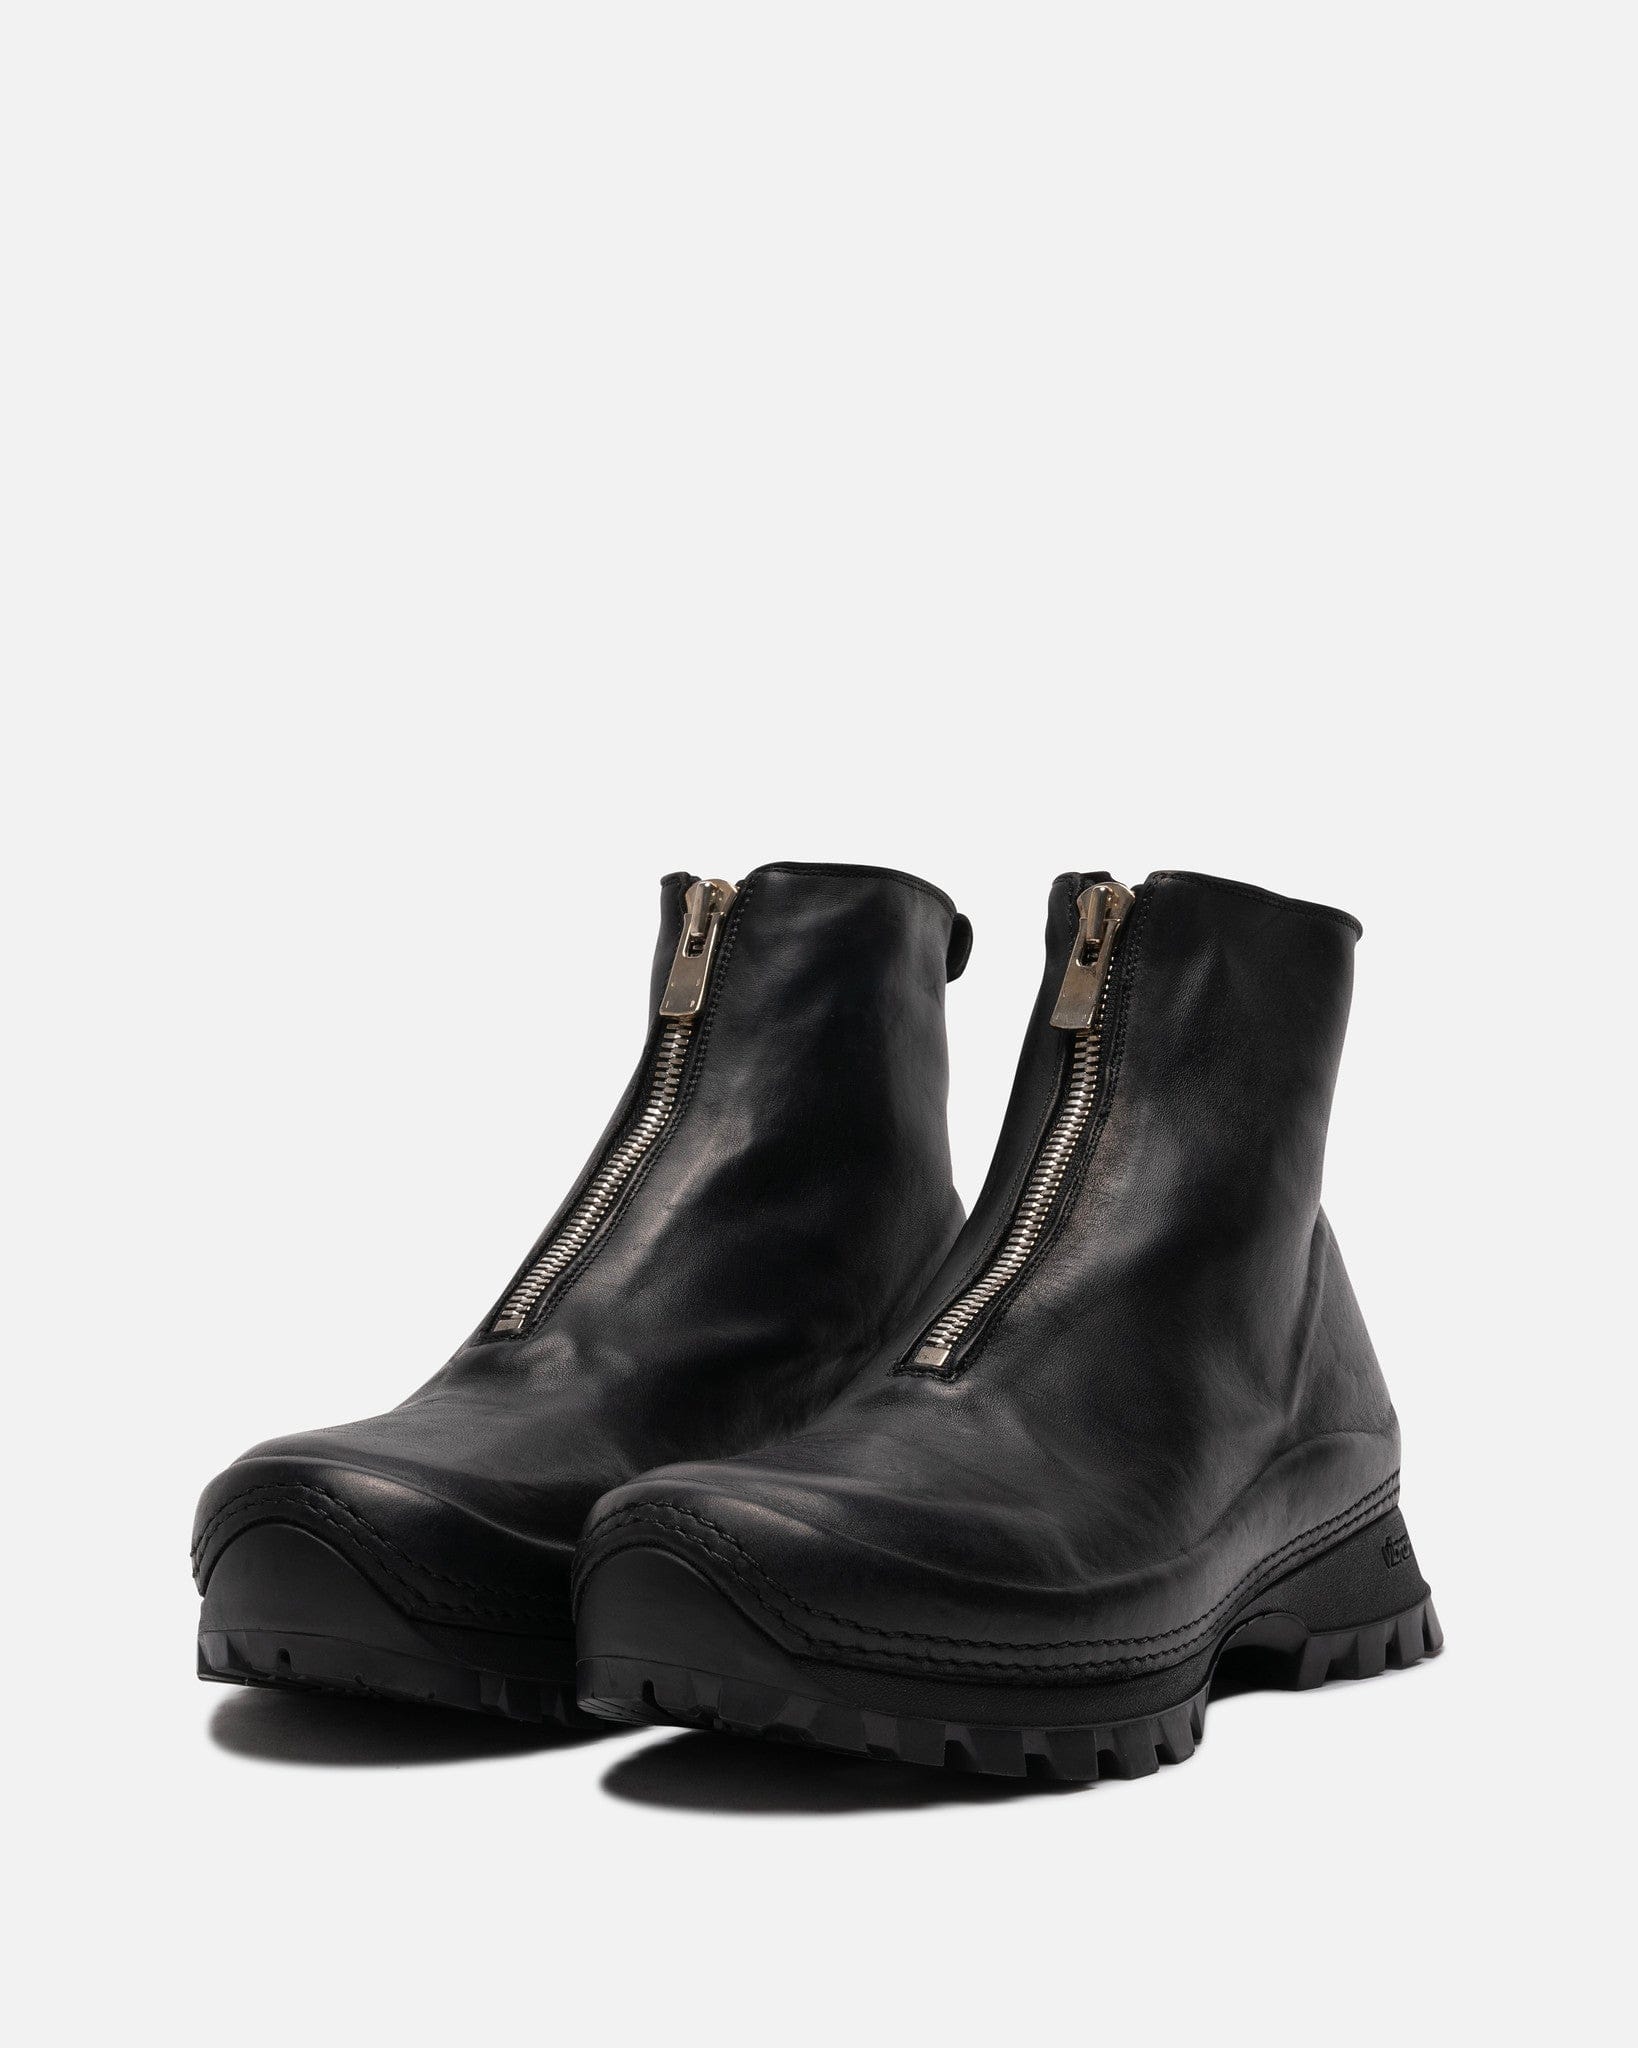 Guidi Men's Boots VS01 Full Grain Leather Front Zip Boots in Black